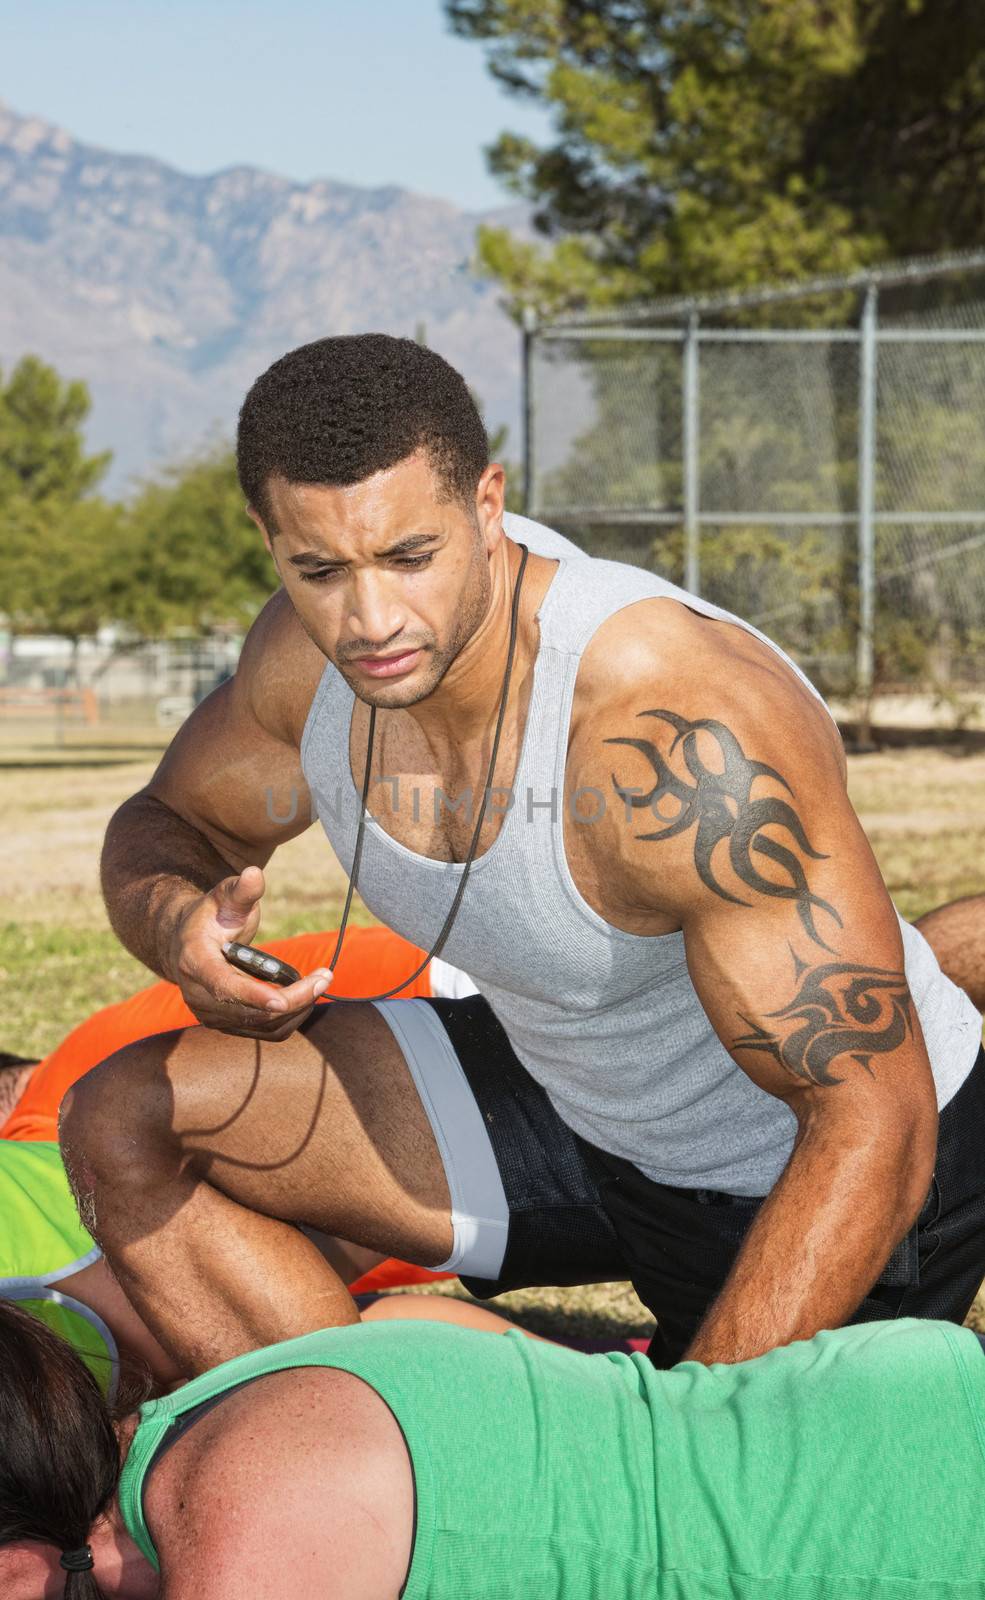 Athletic trainer with tattoo and outdoor fitness class